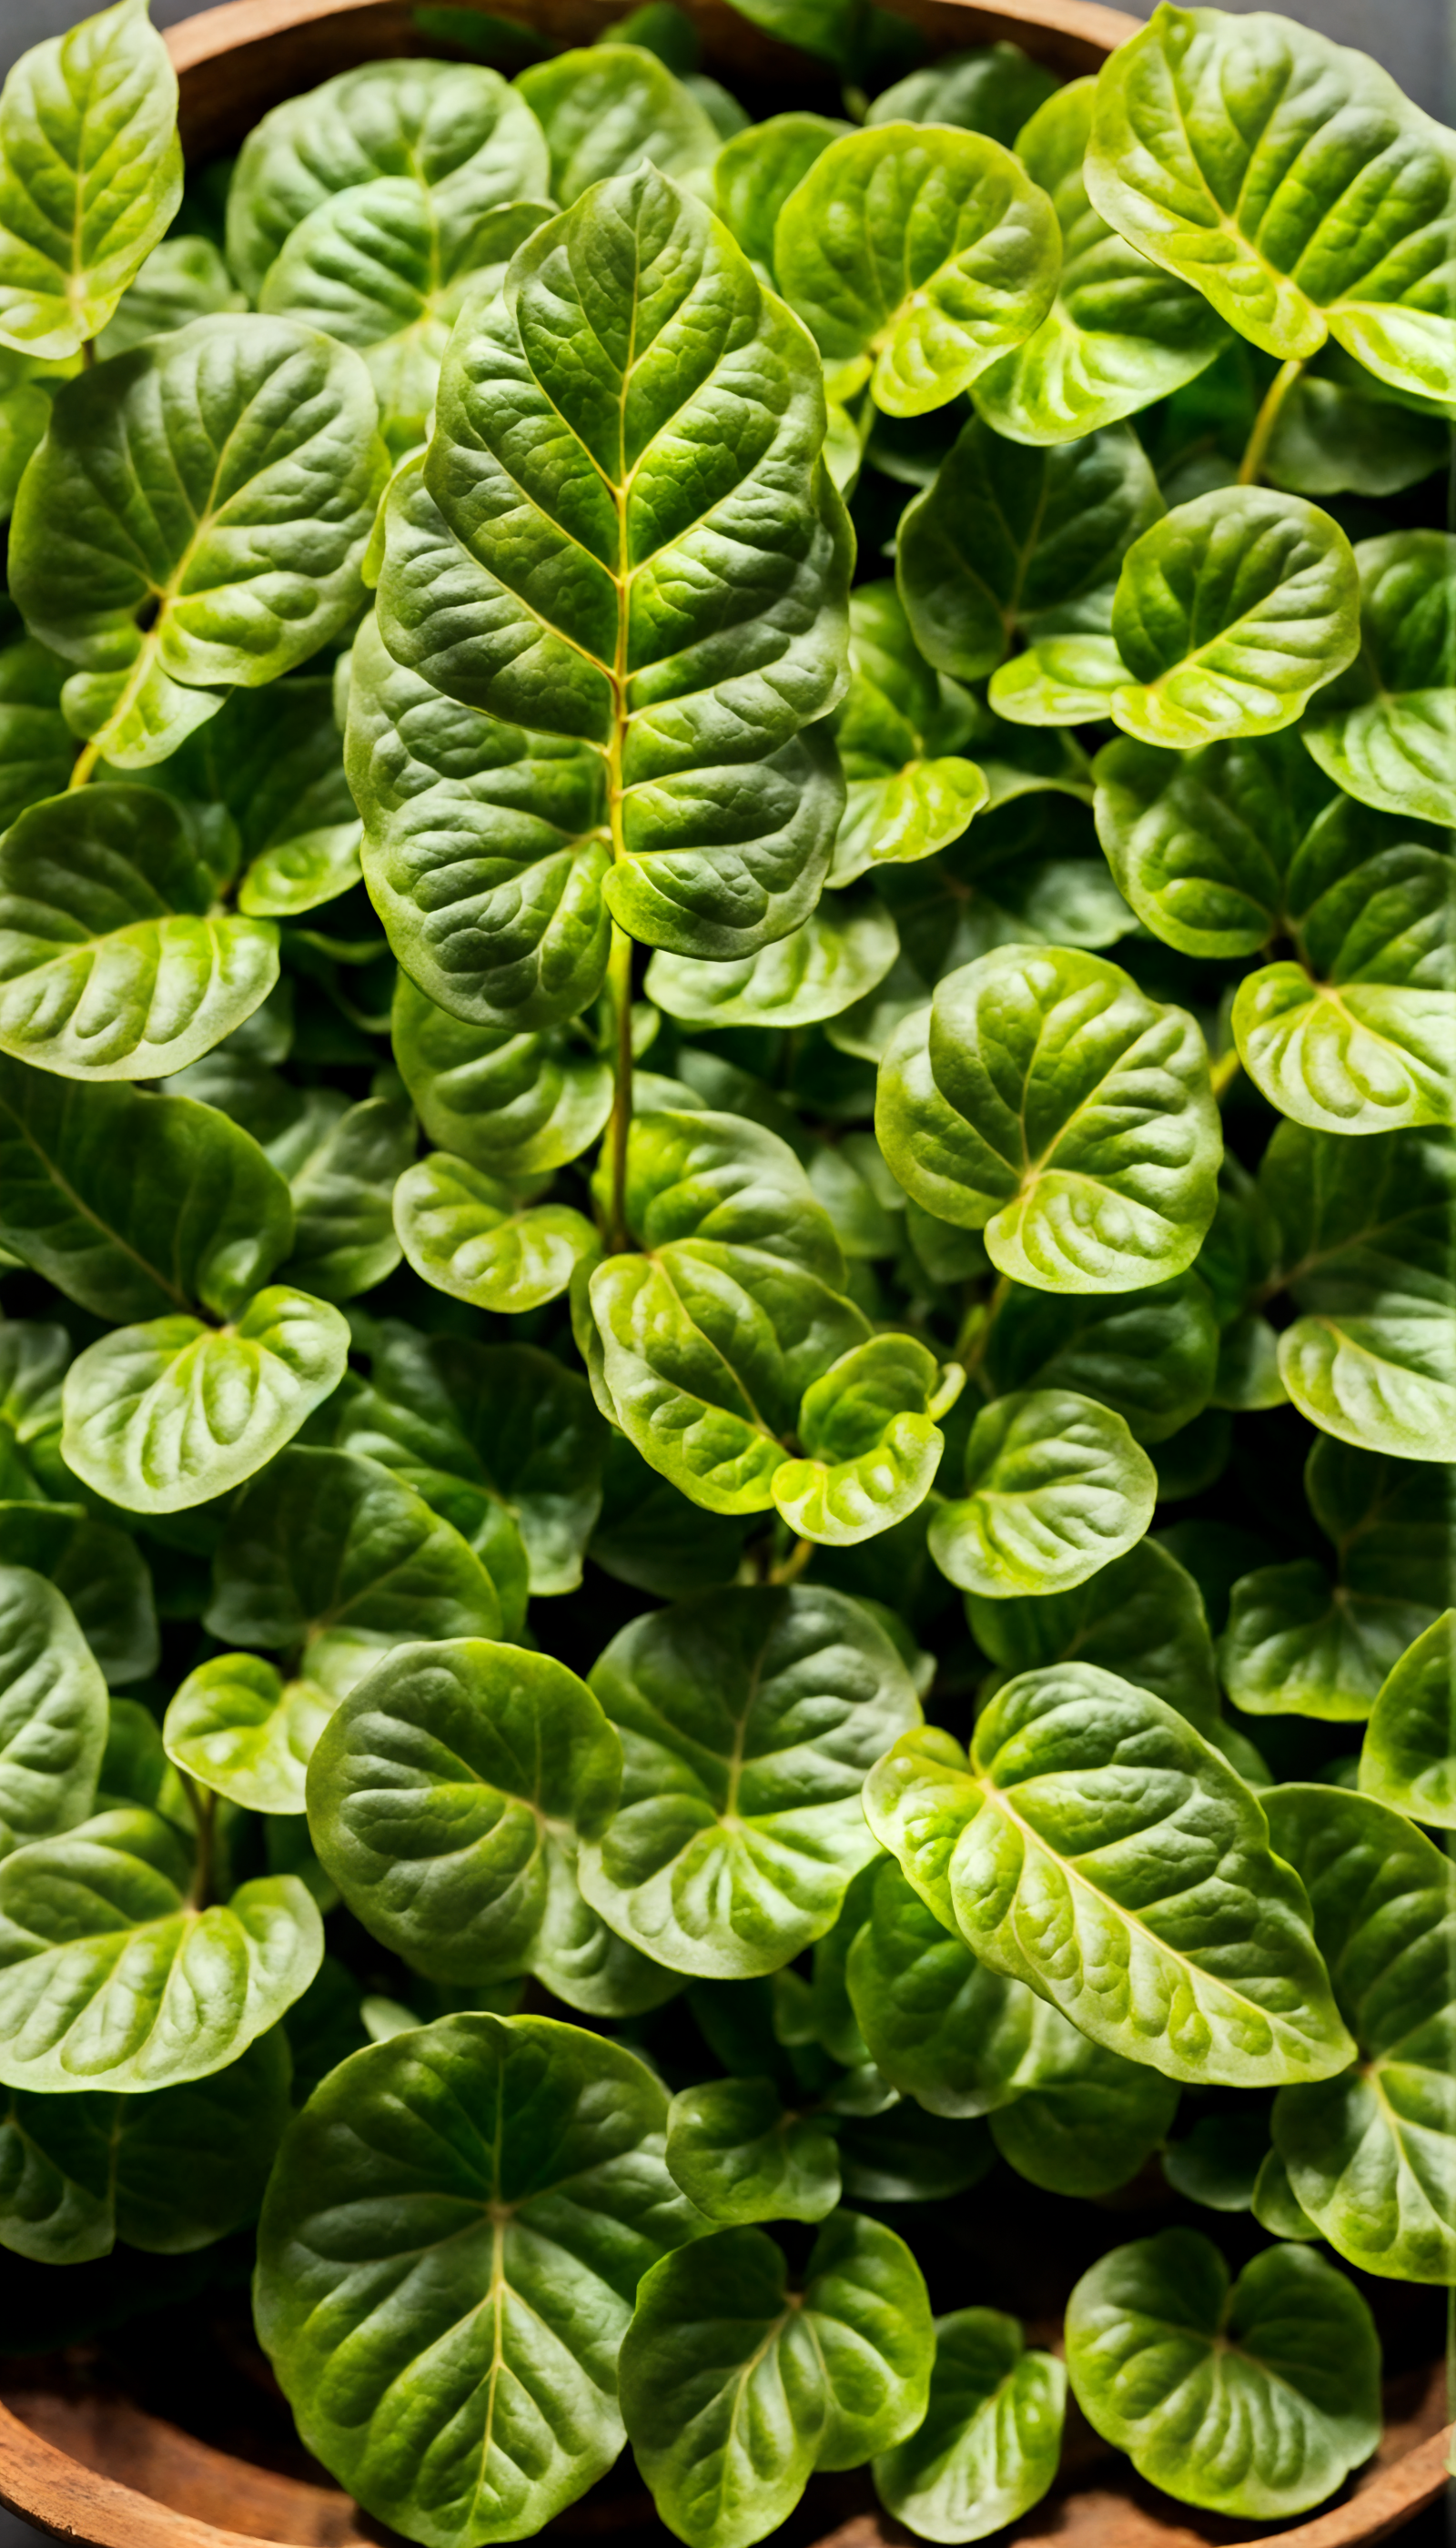 Lysimachia nummularia, or creeping Jenny, arranged in a wooden bowl, with clear lighting against a dark background.